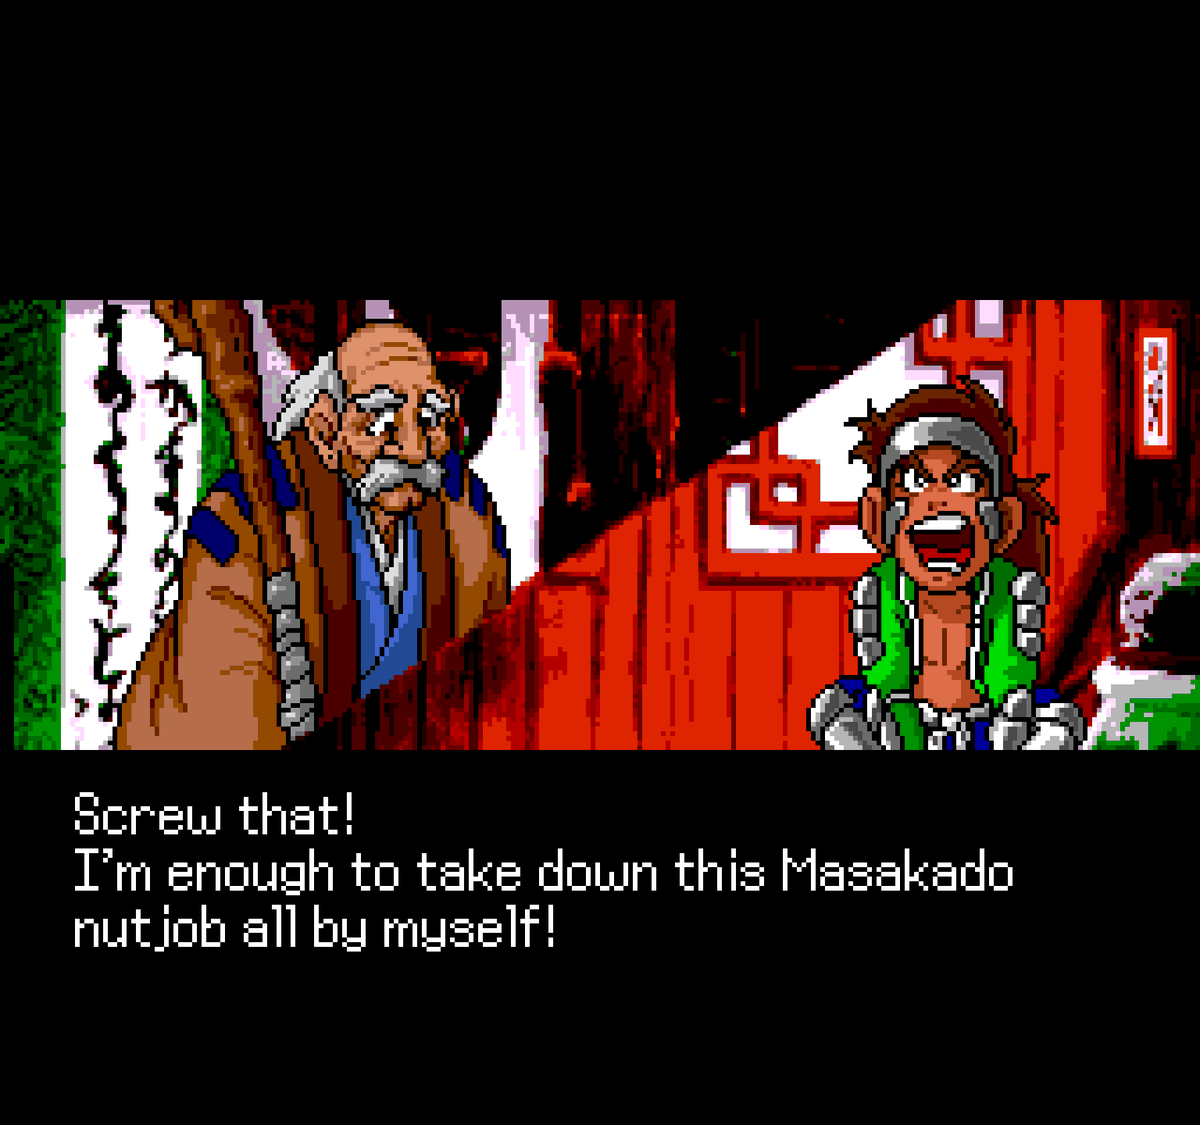 A pixelated screenshot of an old-school RPG hero yelling at an old man.